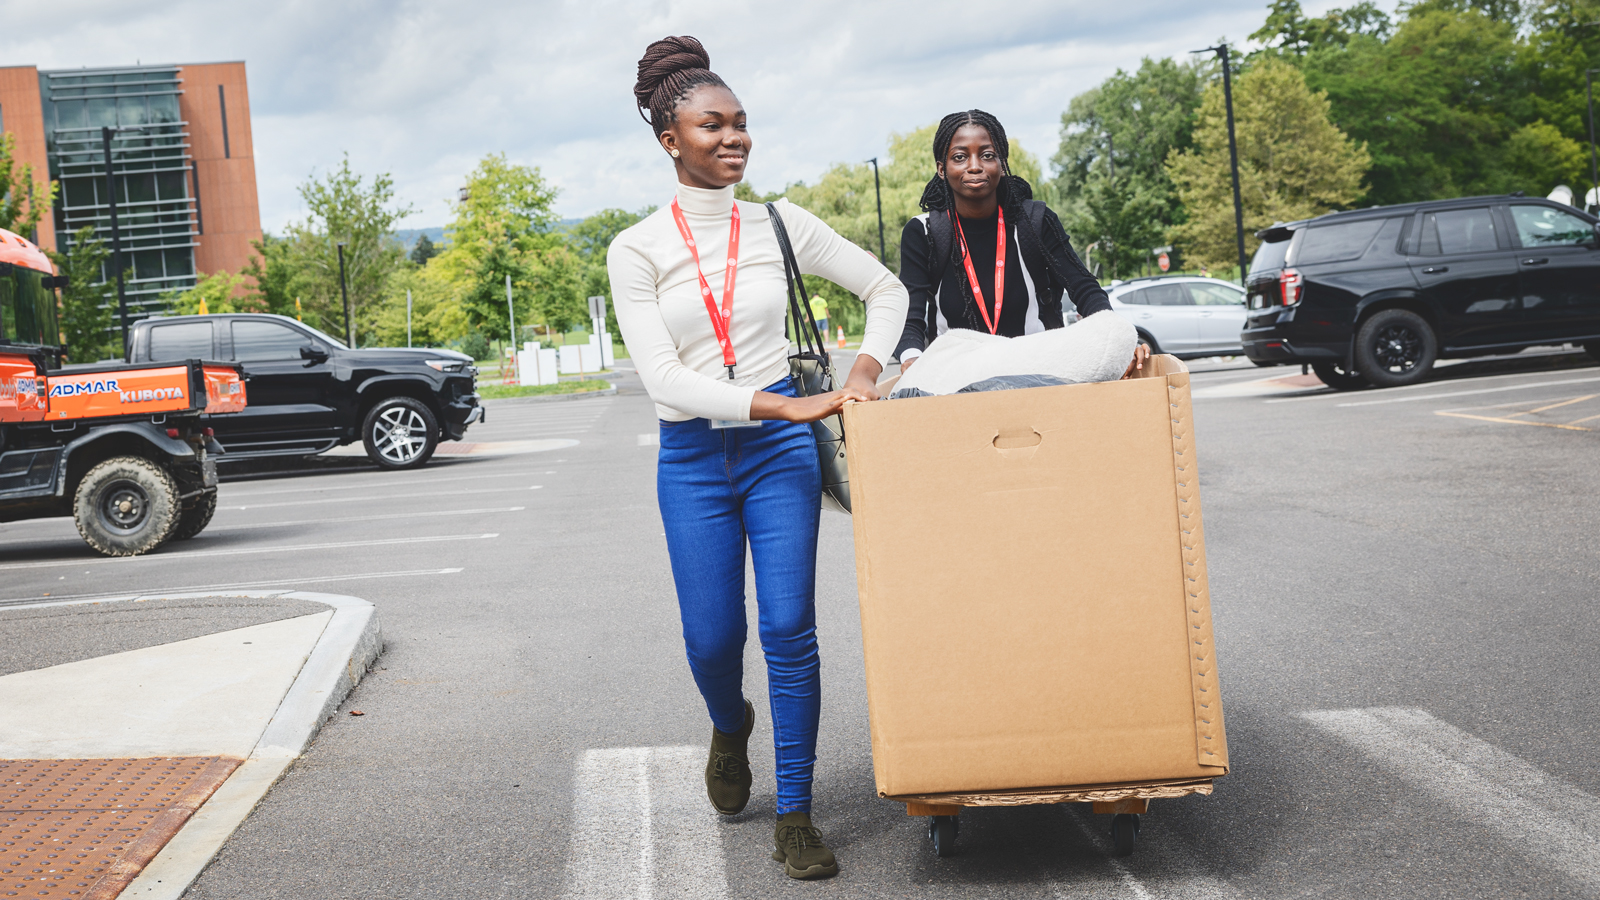 Two female Cornell students push a large box on wheels through a parking lot.